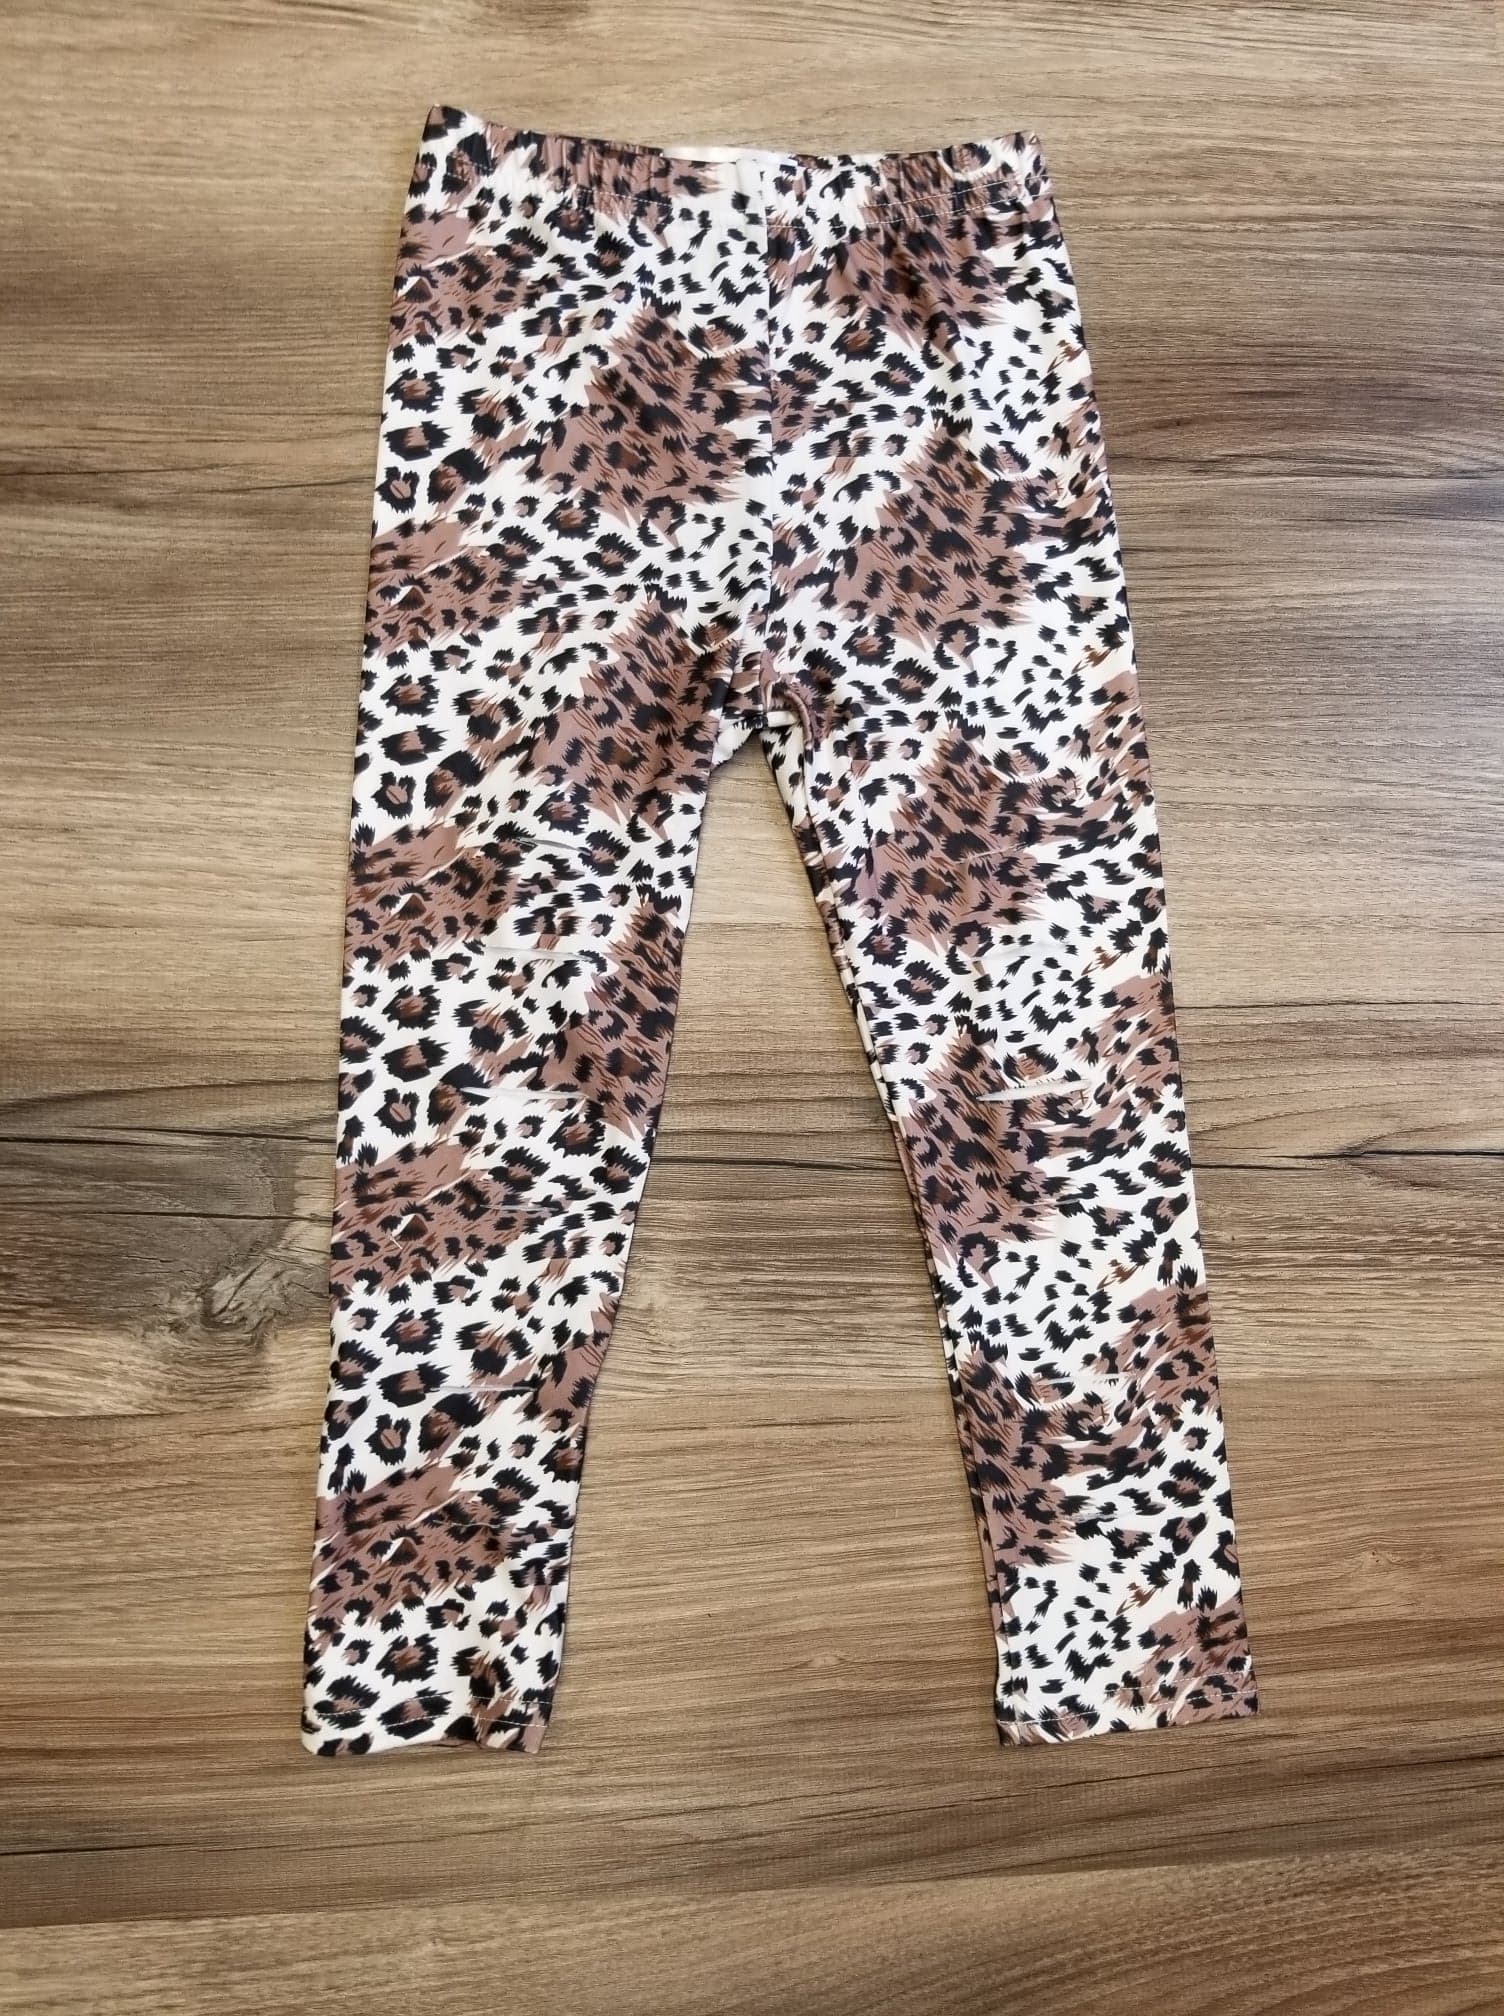 Leopard Print Ripped Leggings  A Touch of Magnolia Boutique   